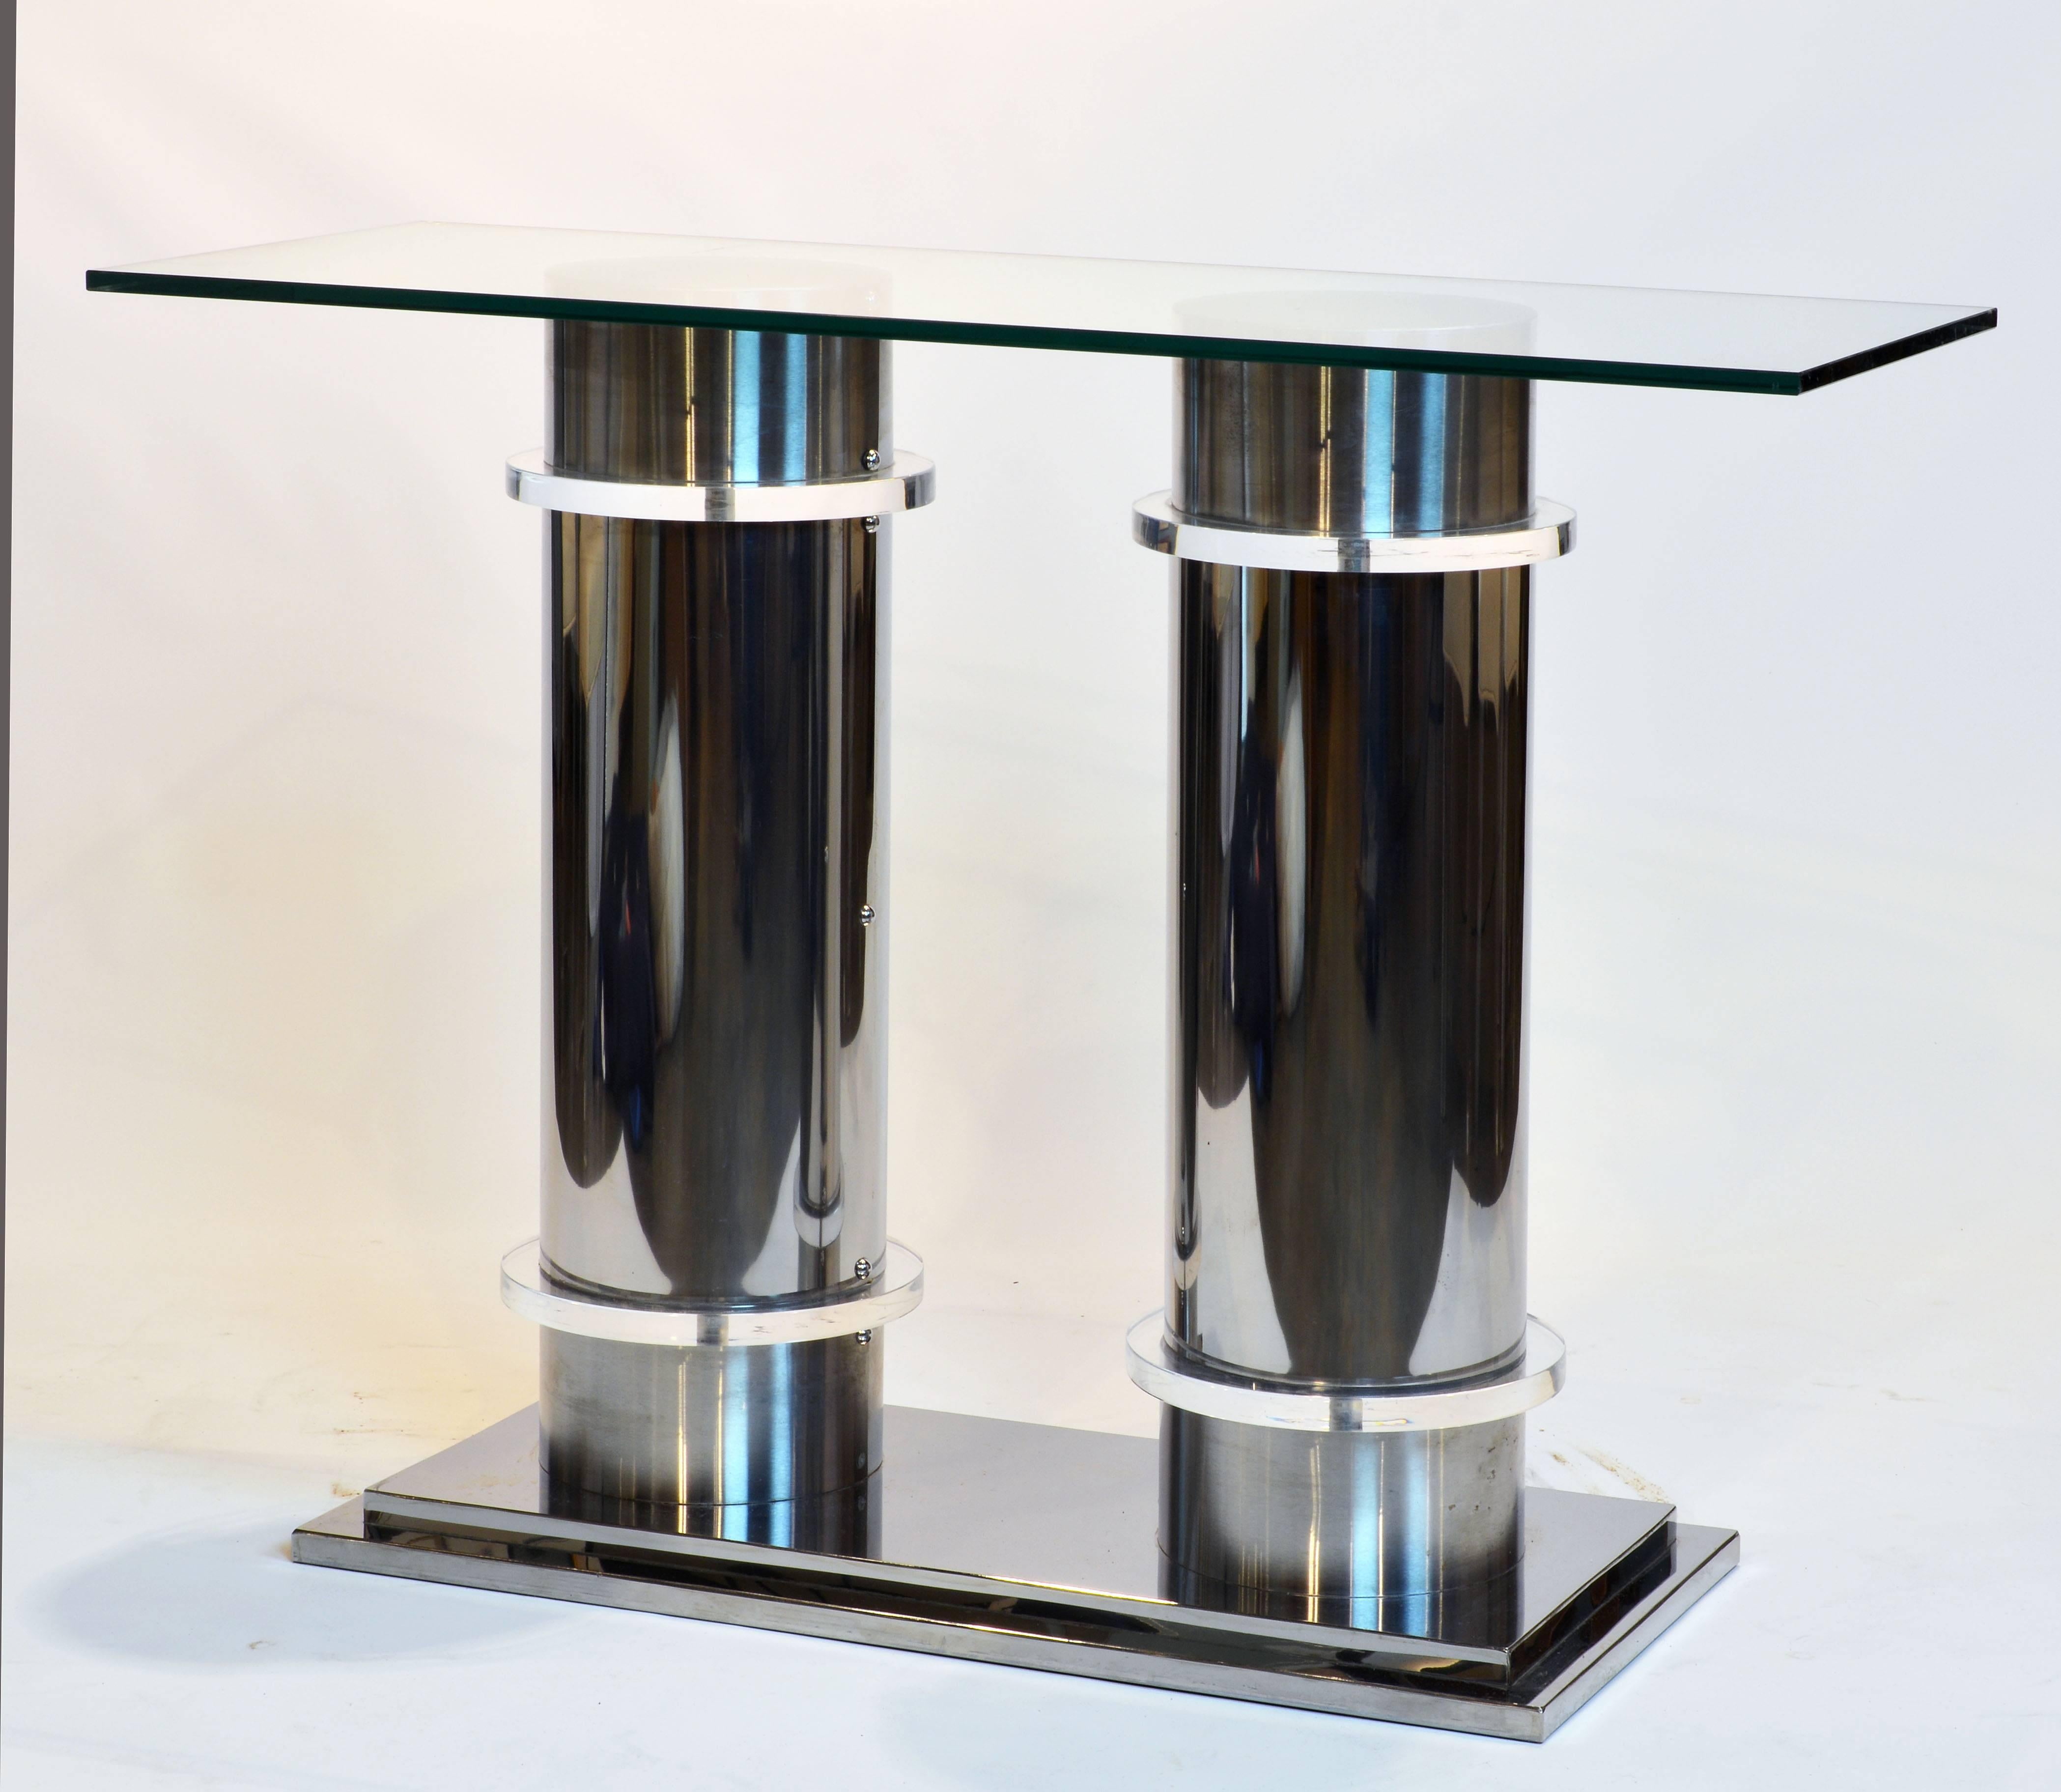 The glass top resting on two columns standing on a stepped chrome base. The columns combine brushed aluminium tops and bottoms centring the chrome midsection divided by thick Lucite disks. A sharp almost neoclassical design.